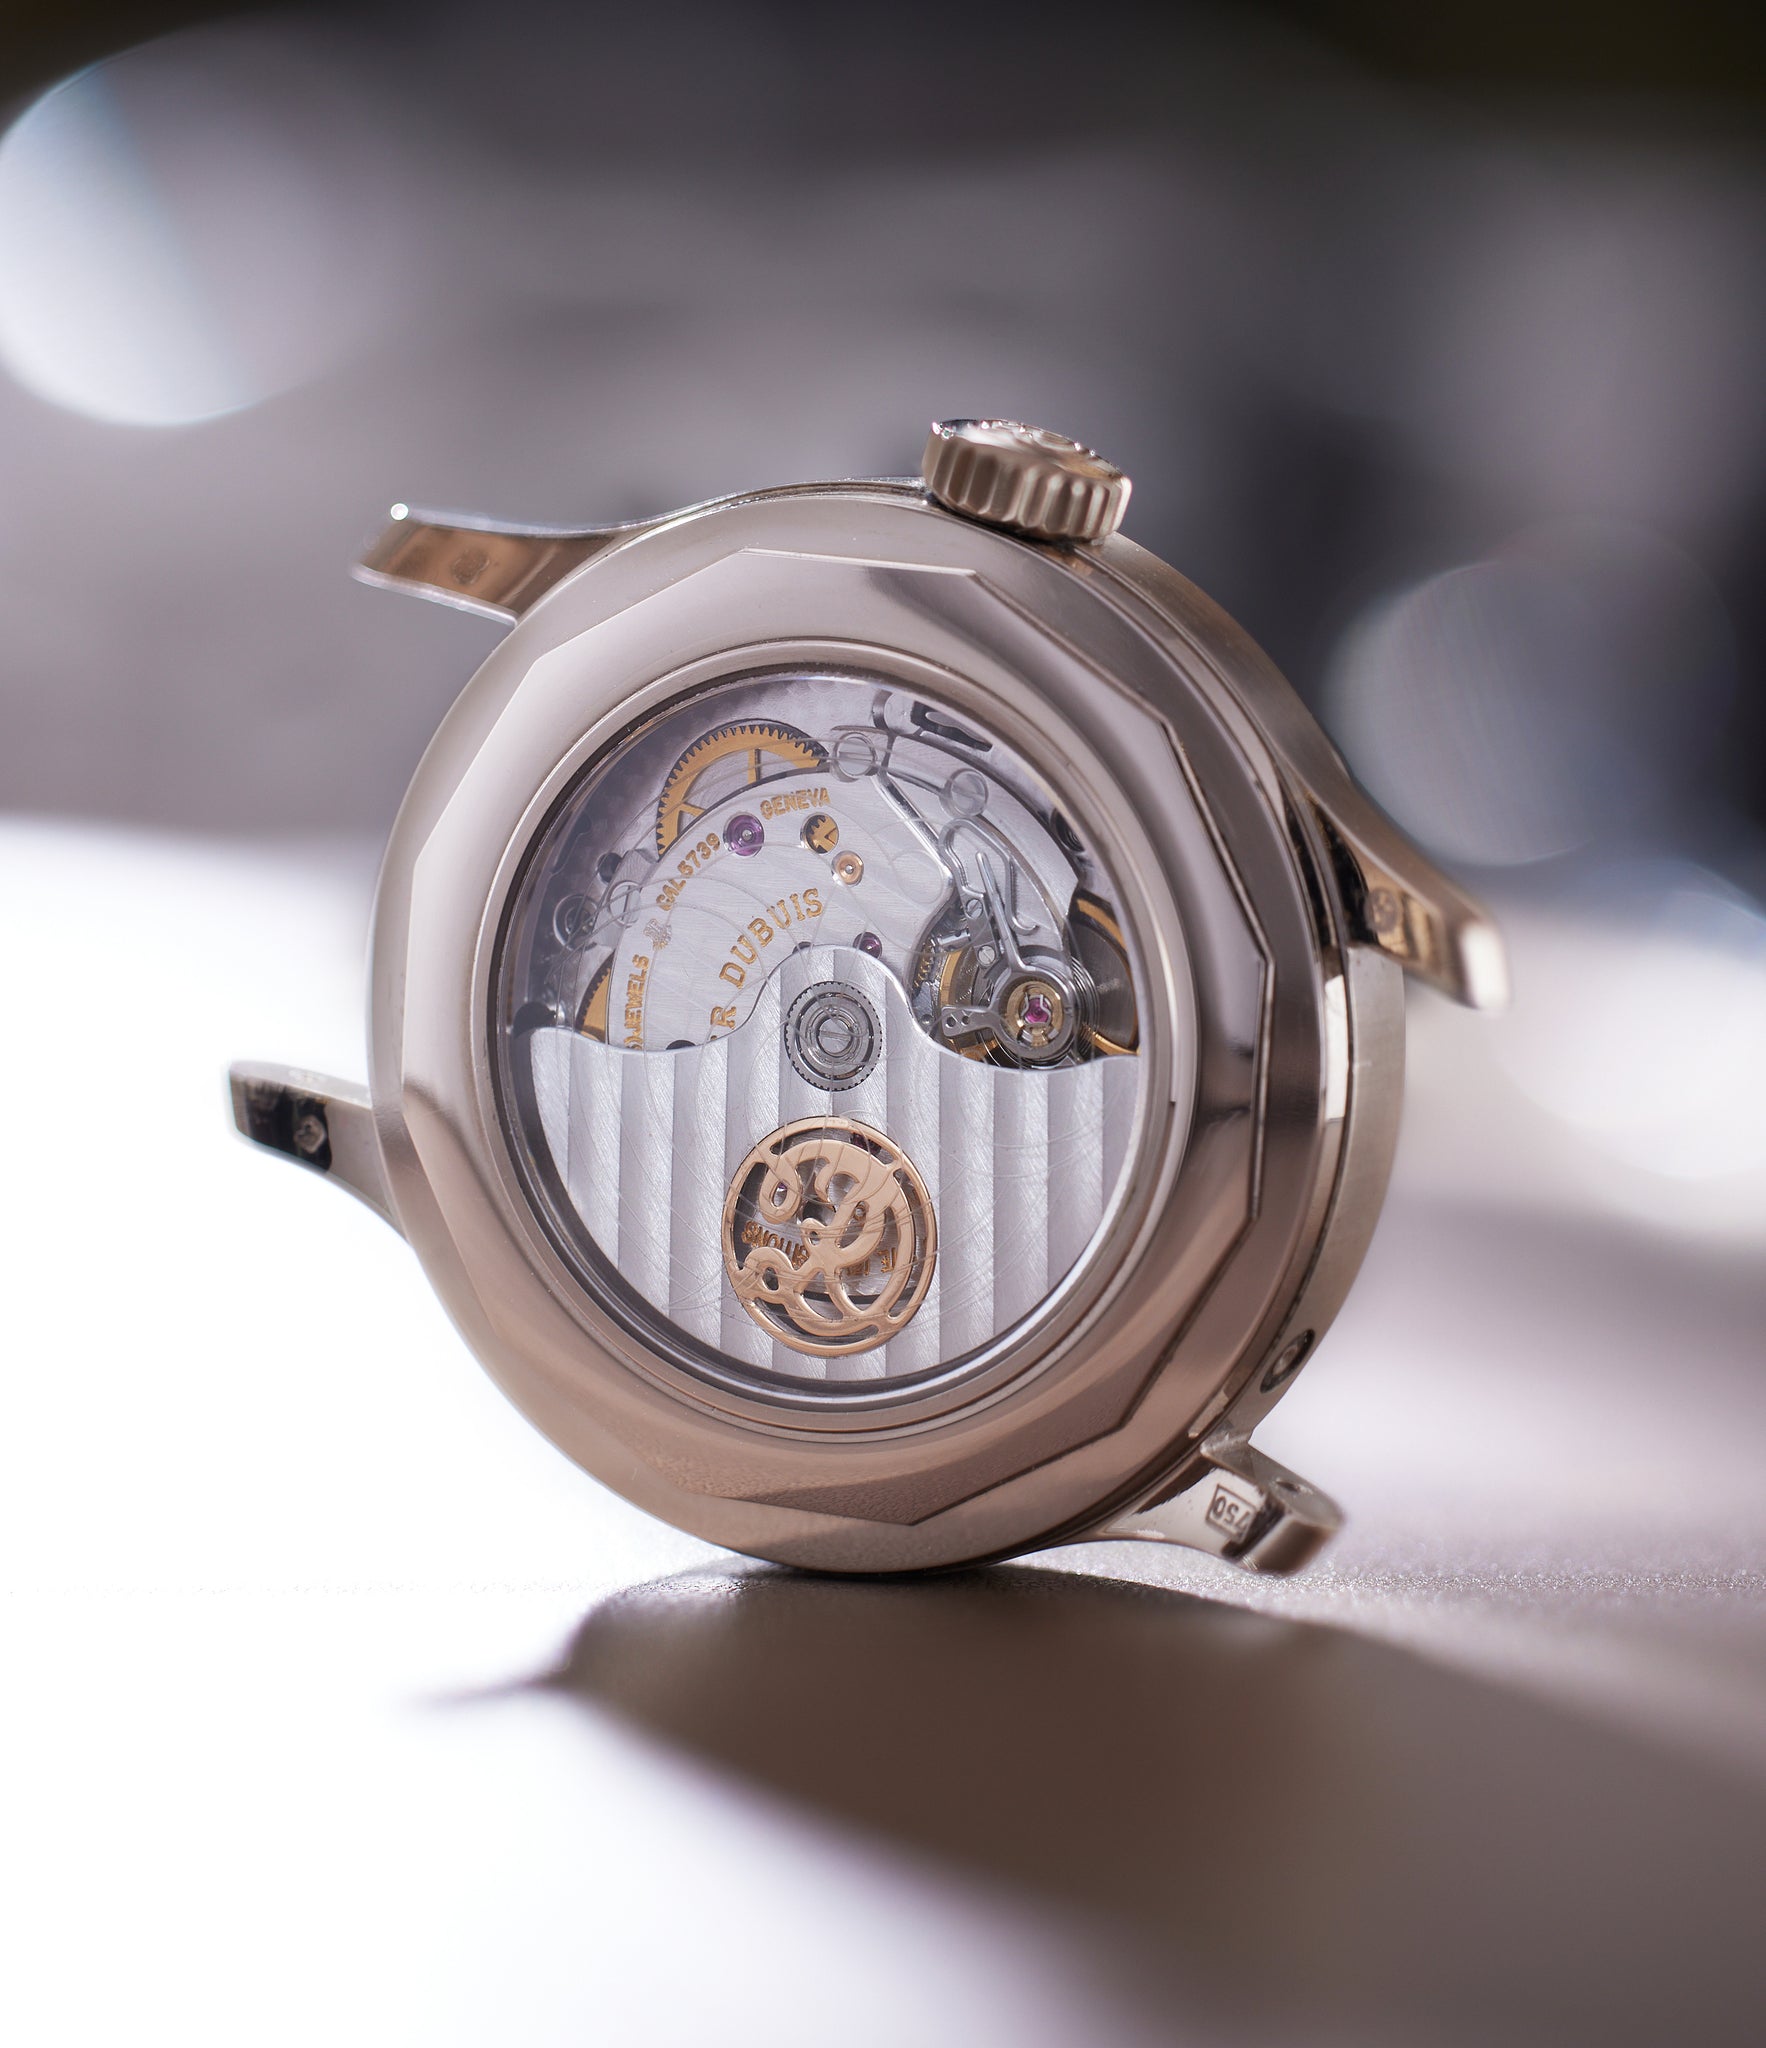 Roger Dubuis Hommage 37 | Perpetual Calendar | 18k White Gold | Available worldwide at A Collected Man | back of watch